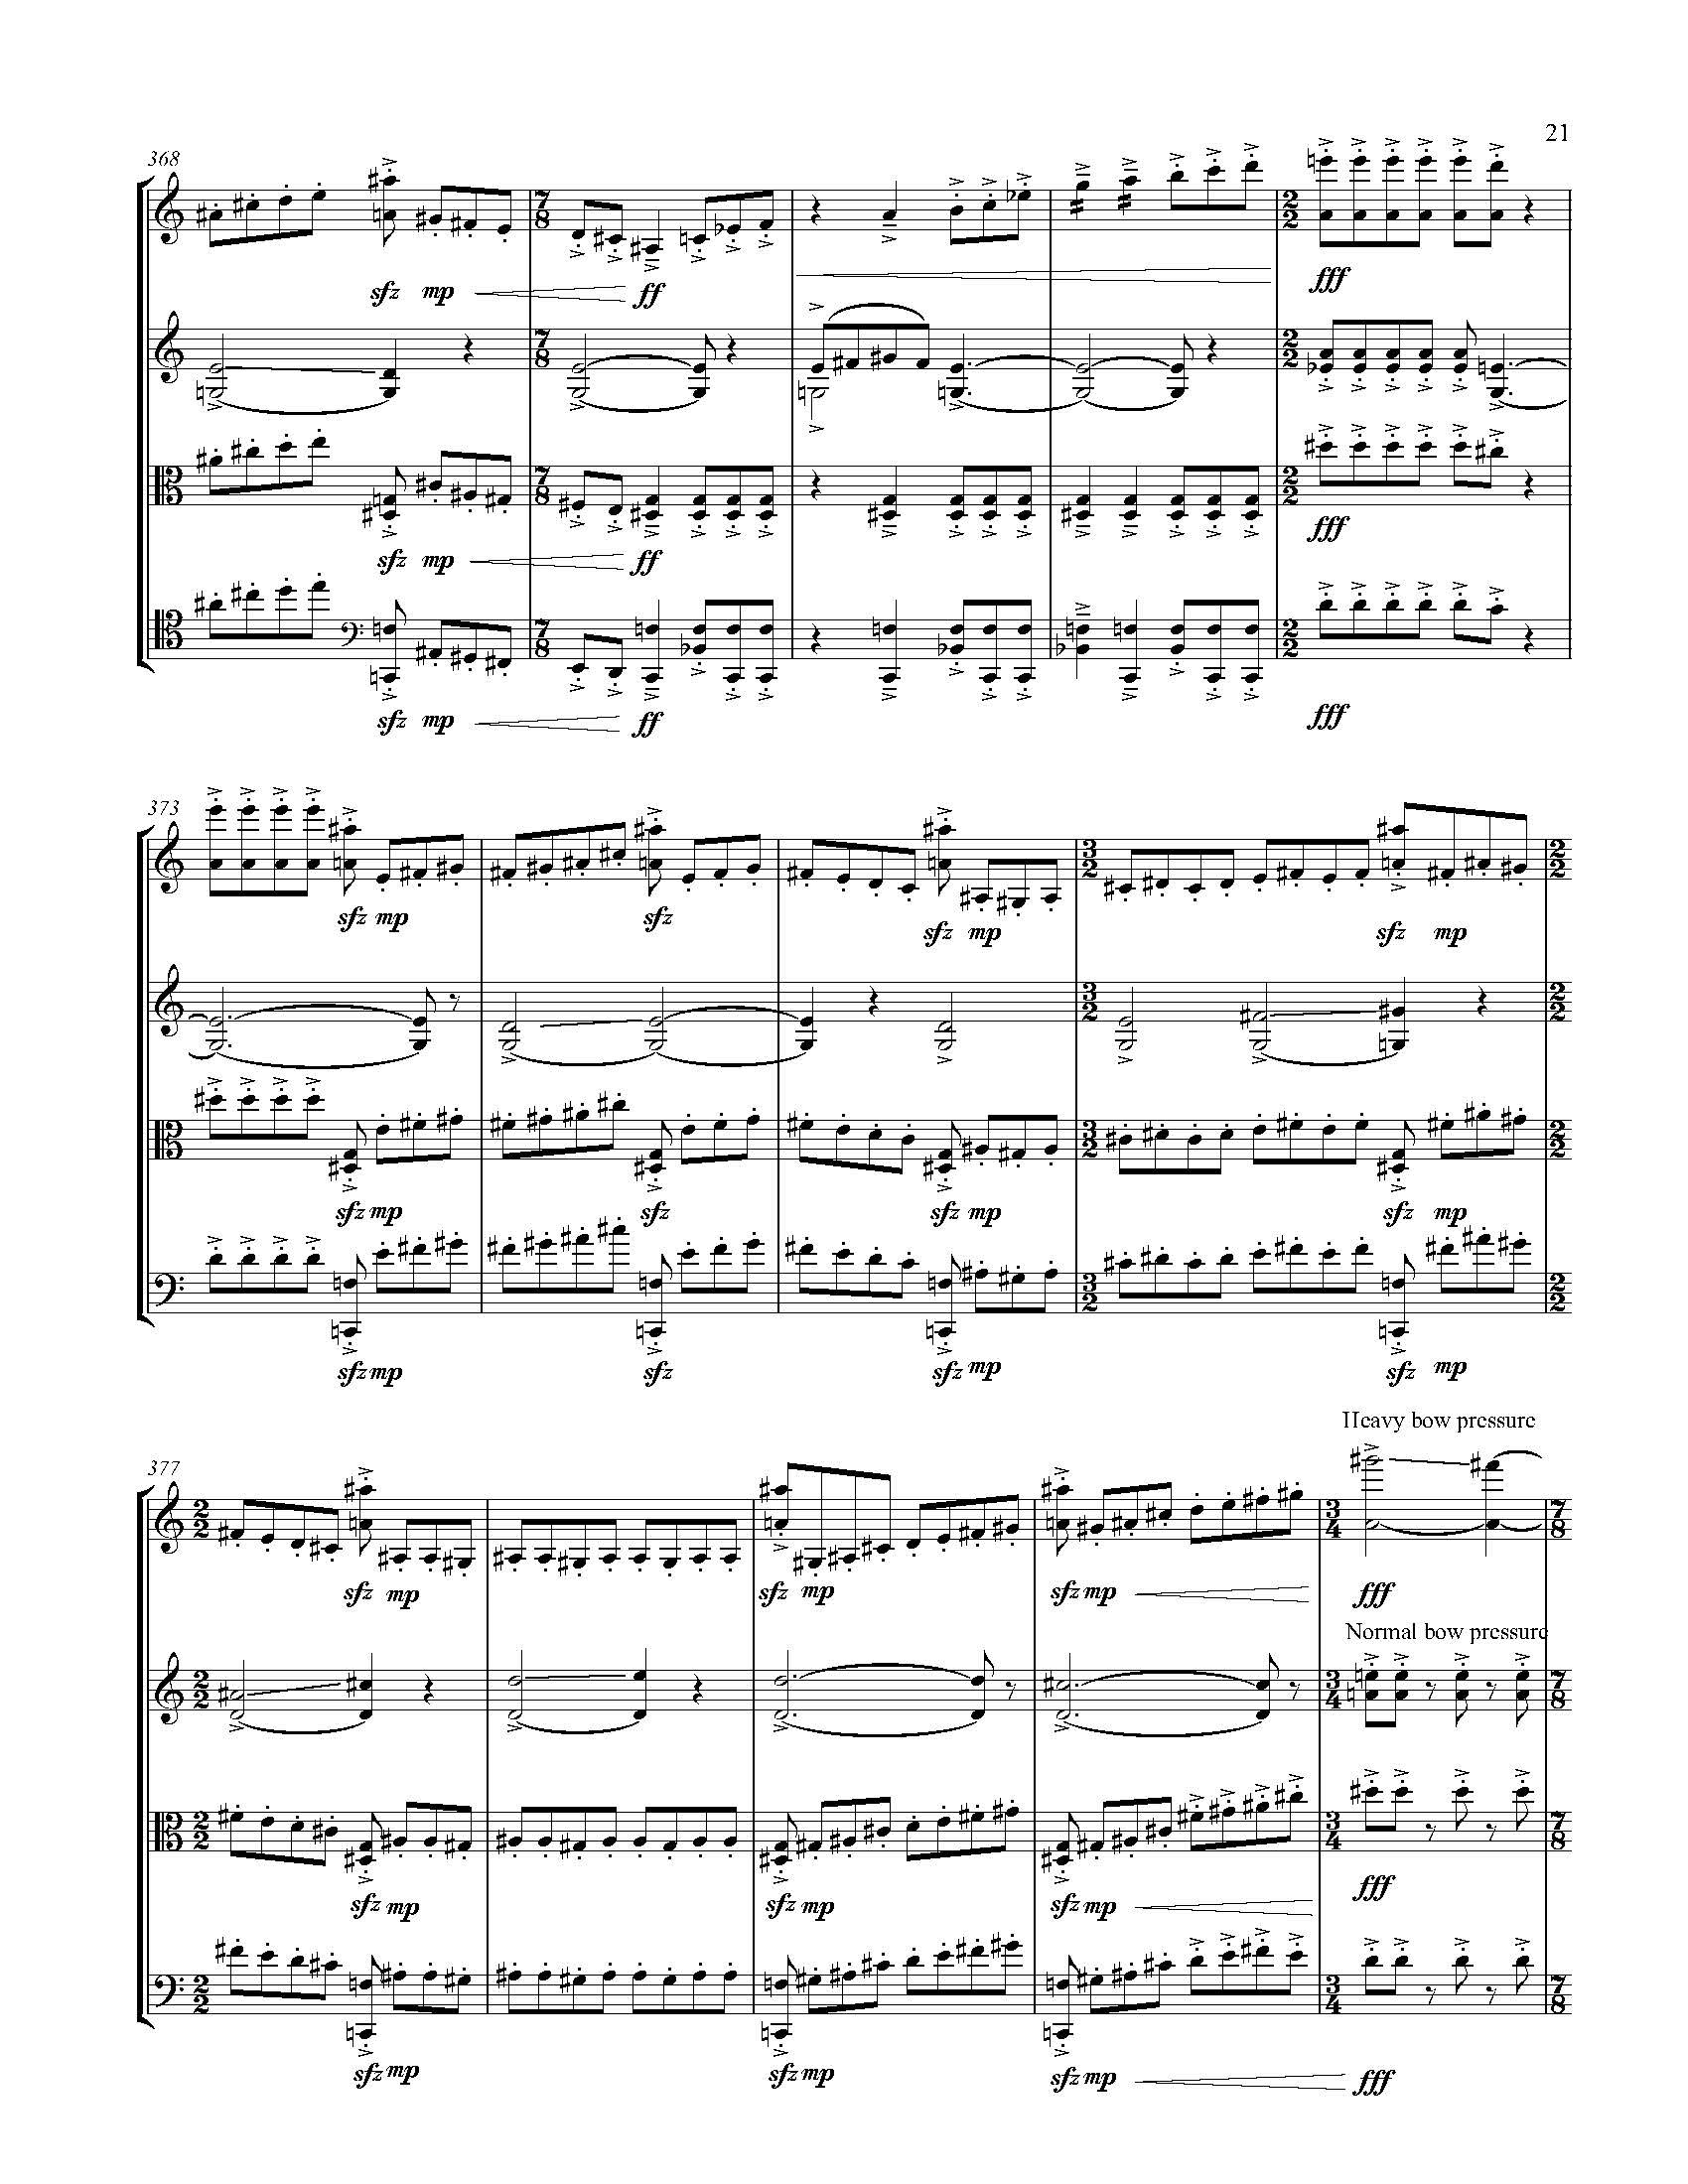 A Country of Vast Designs - Complete Score_Page_27.jpg